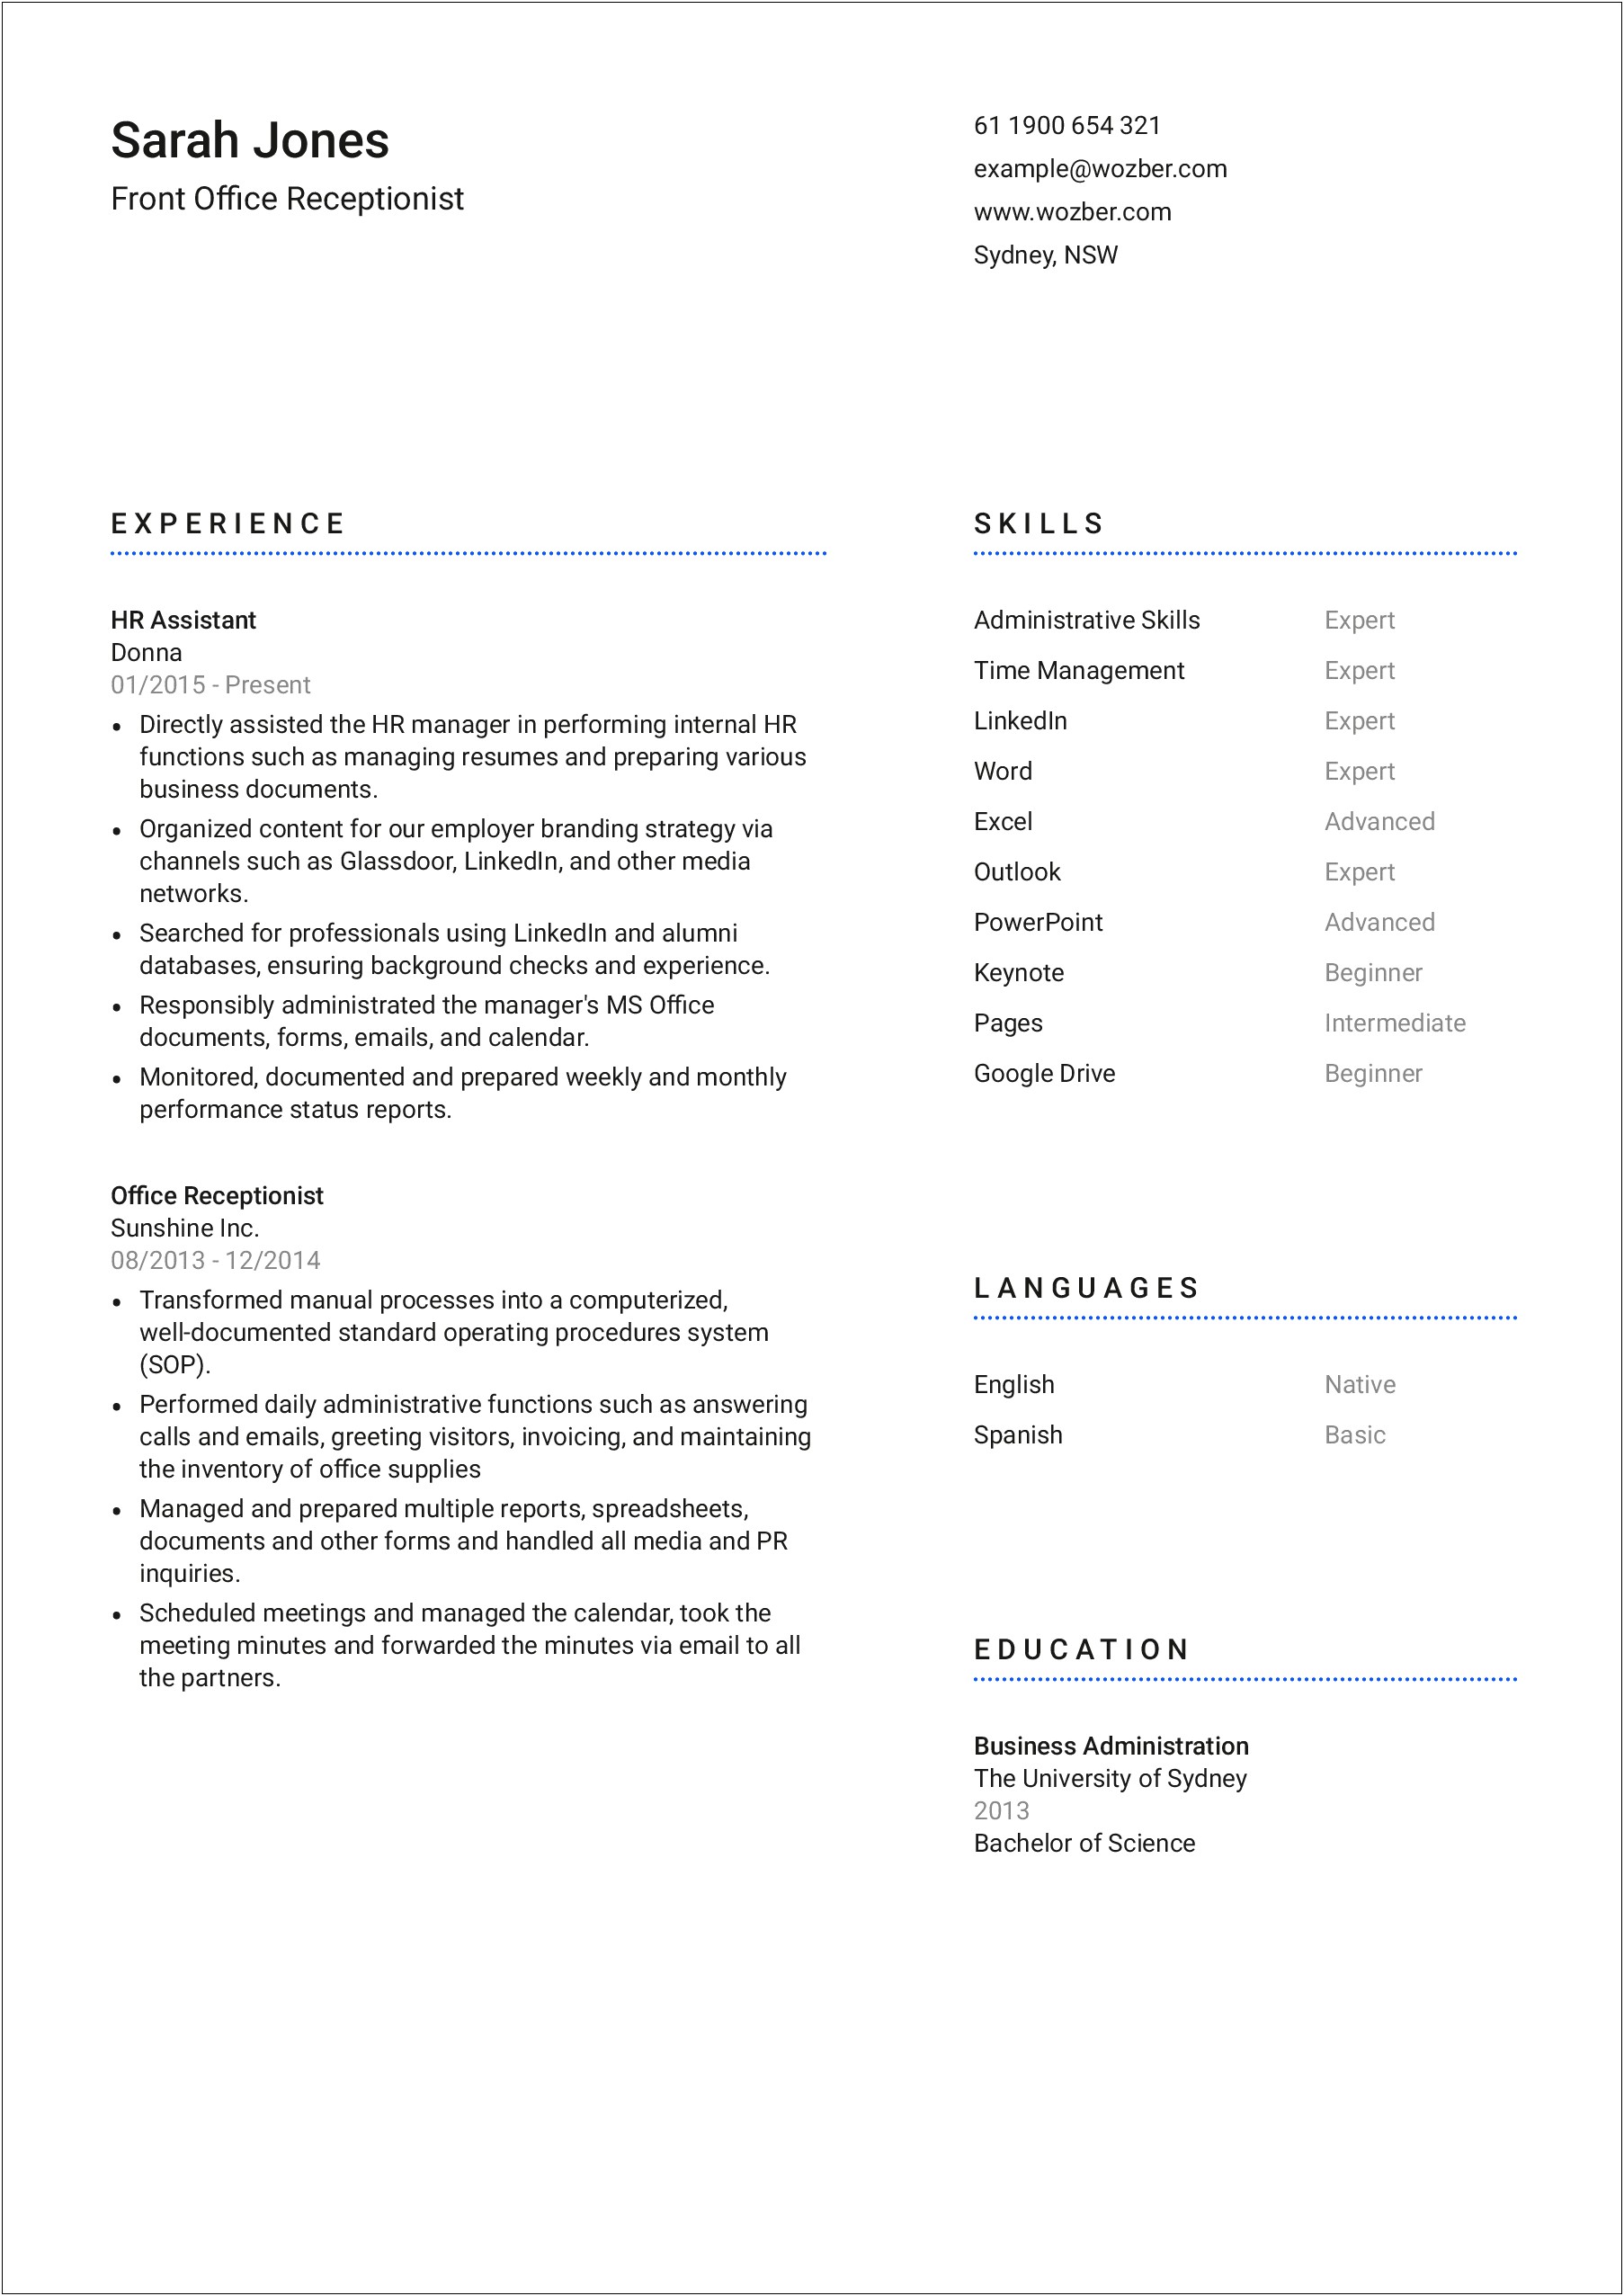 Introduction Summary On Resume For Talent Manager